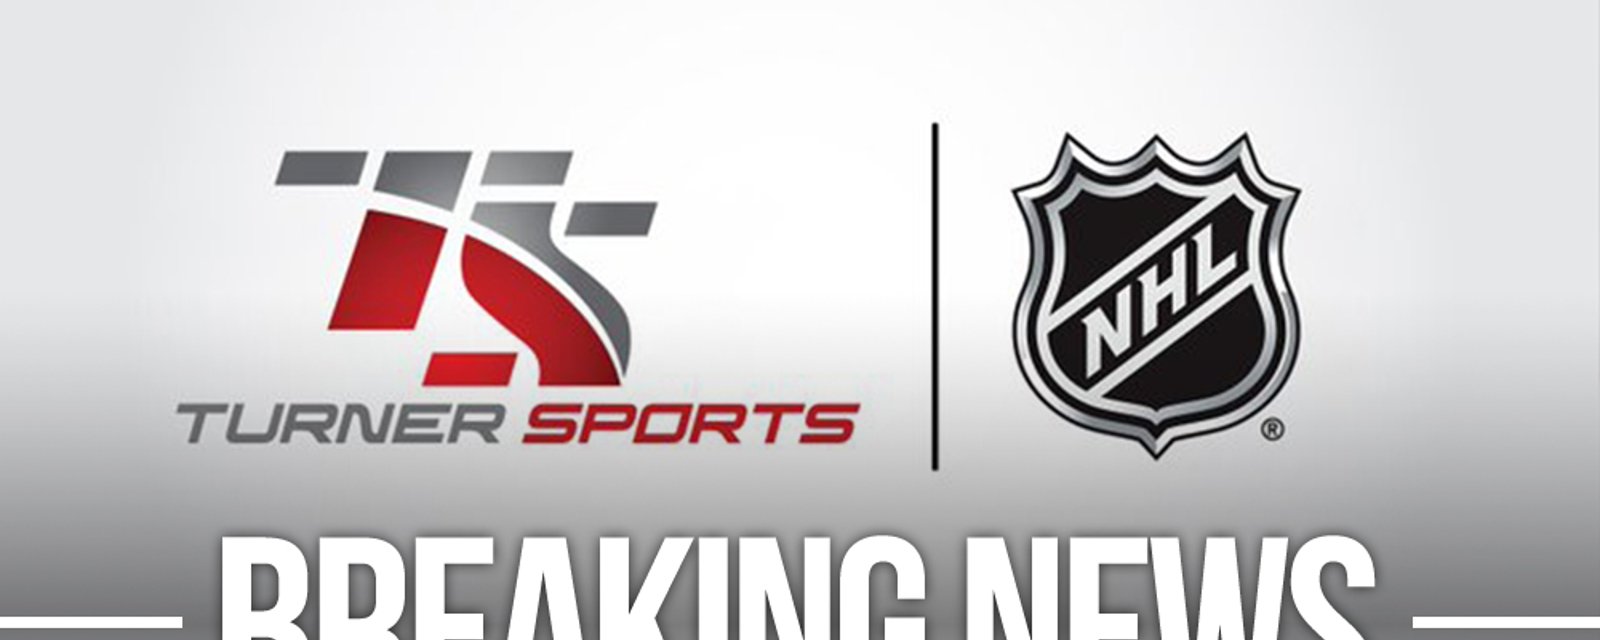 NHL officially announces broadcasting partnership with Turner Sports (TNT and TBS)